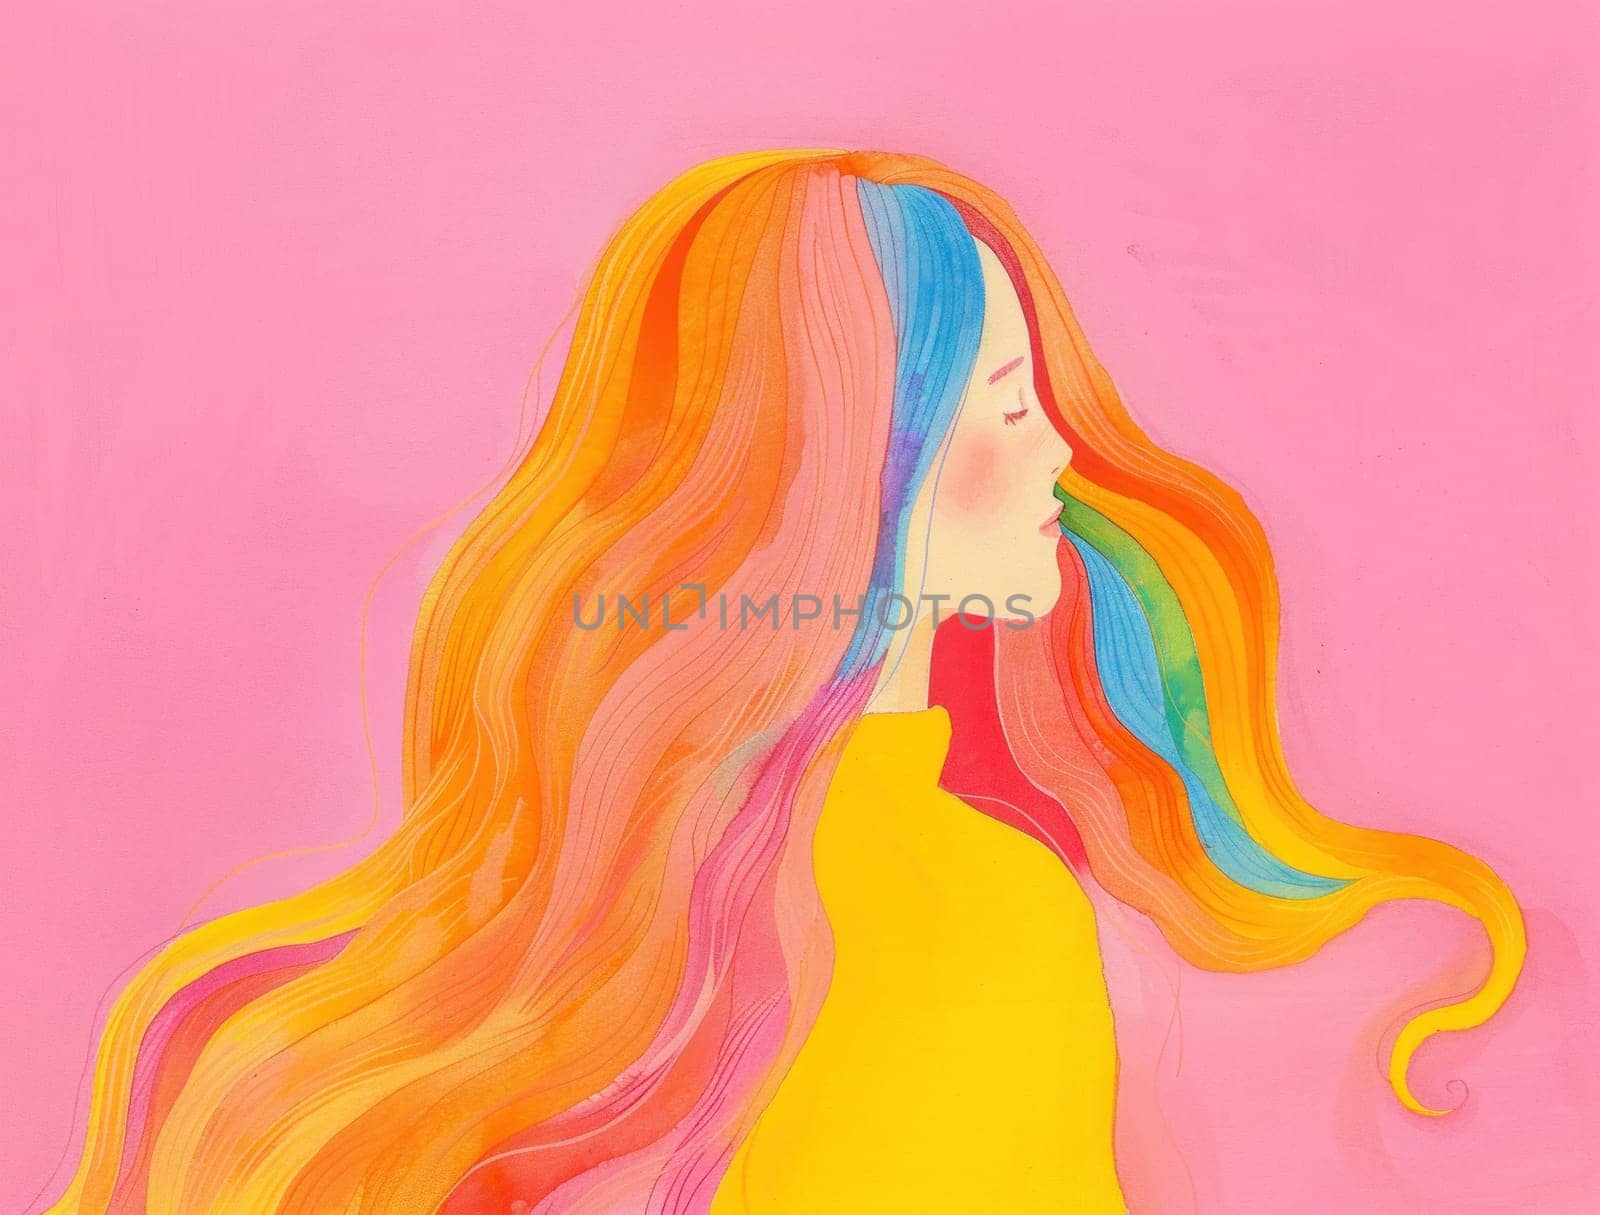 Colorful hair beauty woman portrait with rainbow hair on pink background, art and fashion concept